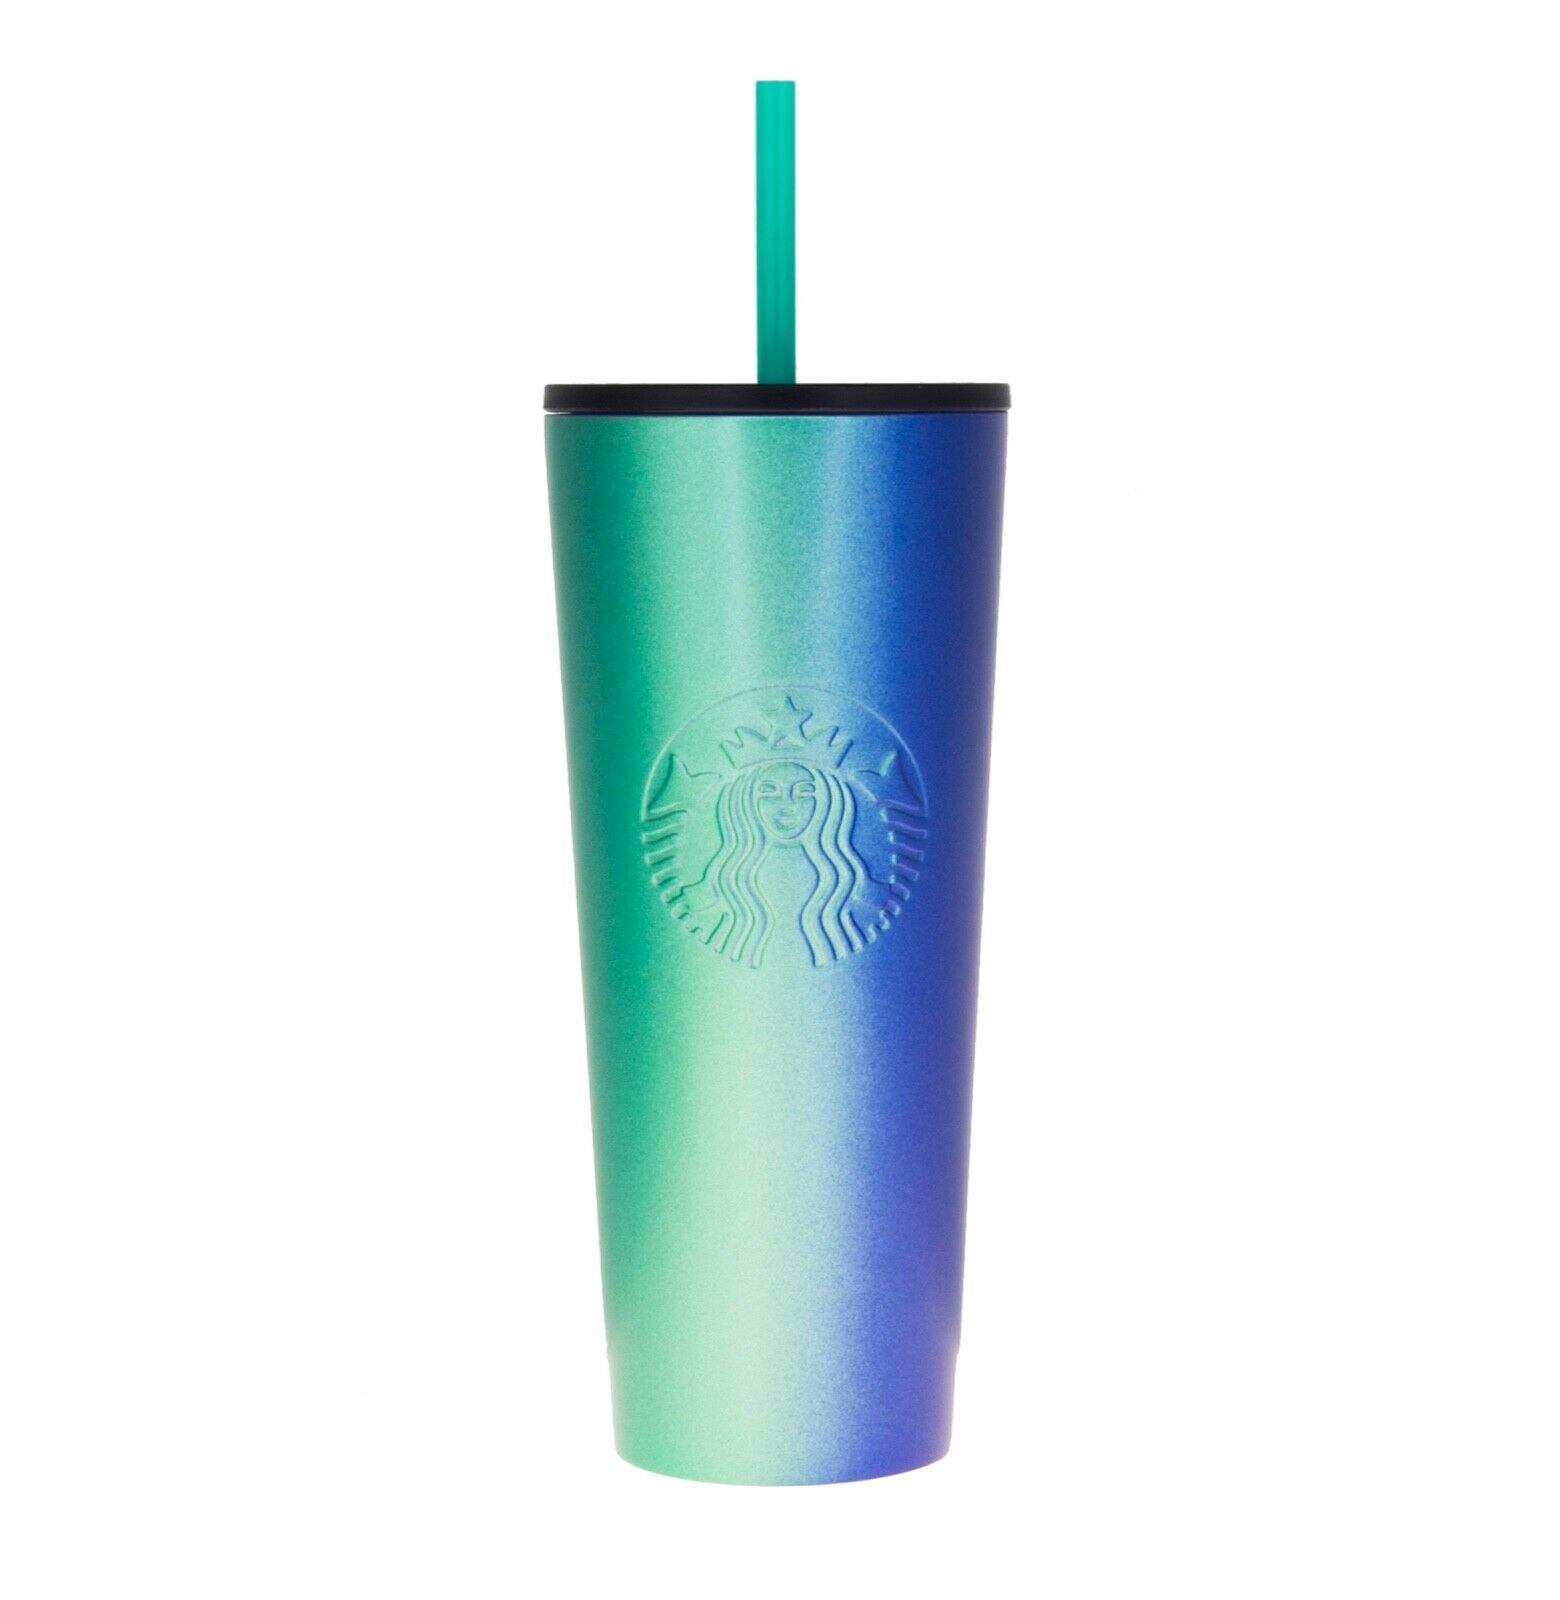 Primary image for Starbucks Blue Teal Gradient Glitter Stainless Steel Tumbler Cold Cup 24oz Venti